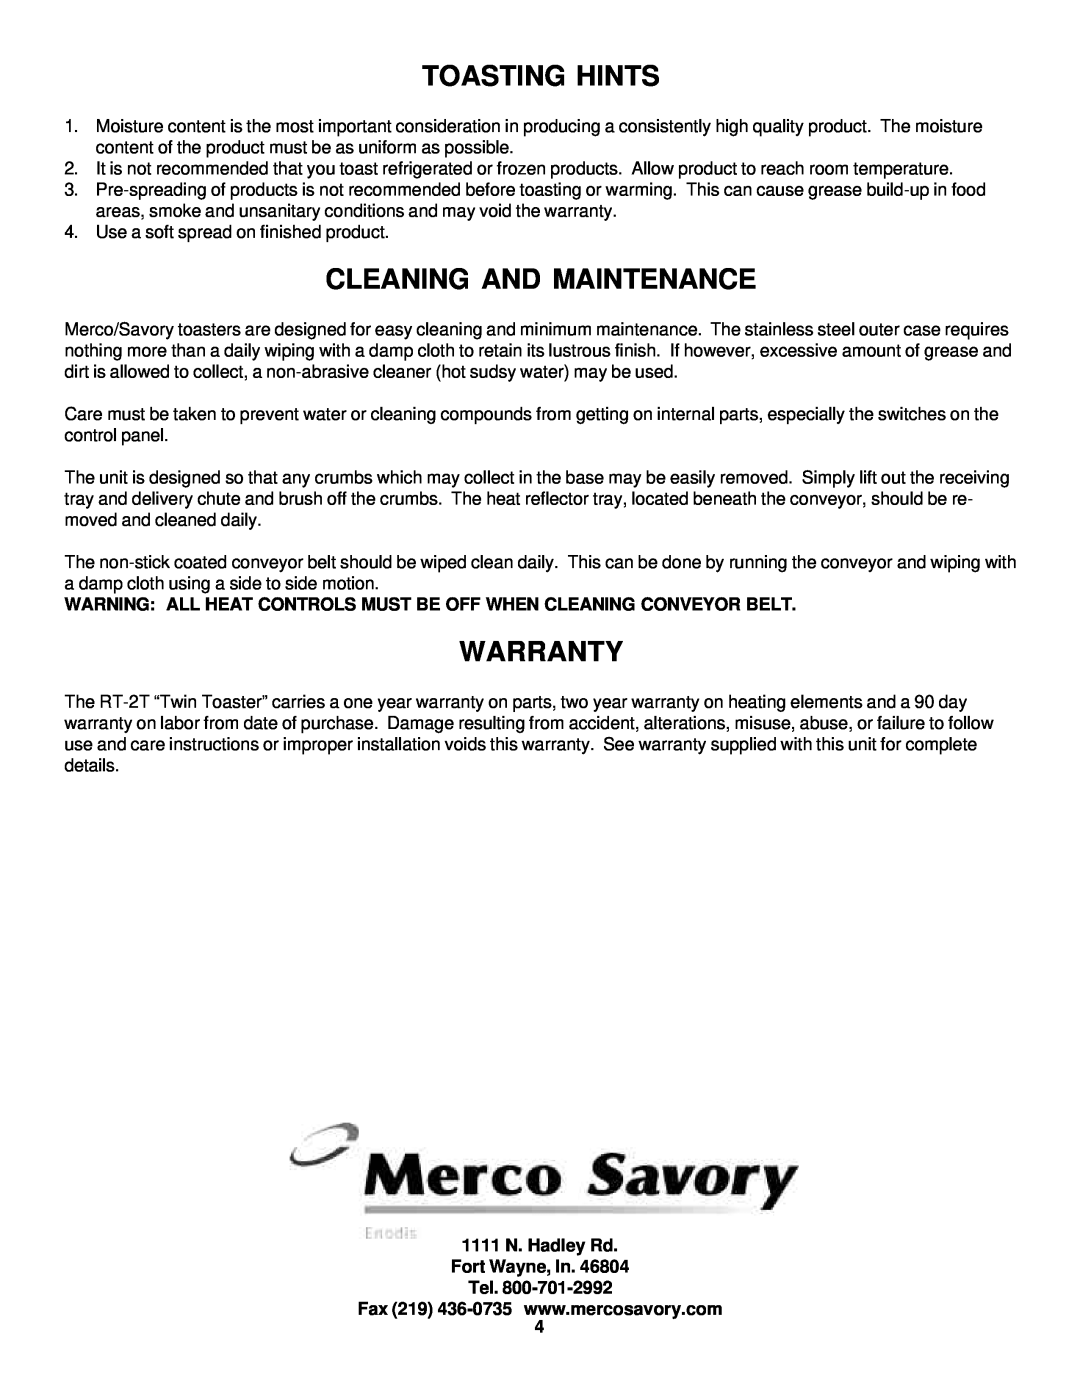 Merco Savory RT-2T Toasting Hints, Cleaning And Maintenance, Warranty, 1111 N. Hadley Rd Fort Wayne, In Tel 